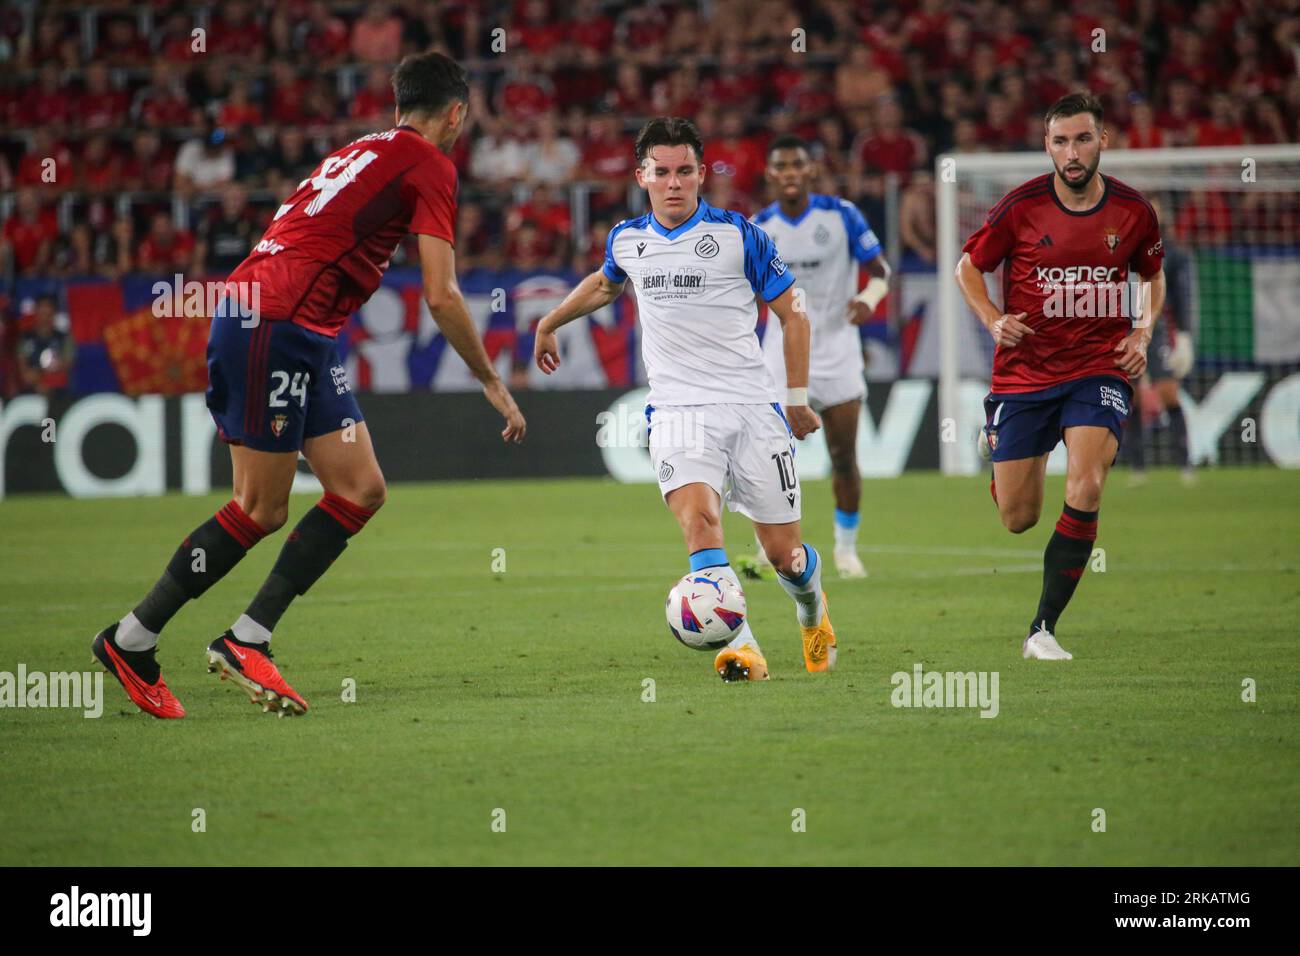 Pamplona, Spain, 24th August, 2023: Club Brugge's player Hugo Vetlessen (10) passes the ball in front of several opponents during the first leg of the previous round of the UEFA Europa Conference League 2023-24 between CA Osasuna and Club Brugge at the El Sadar Stadium, in Pamplona, on August 24, 2023. Credit: Alberto Brevers / Alamy Live News. Stock Photo